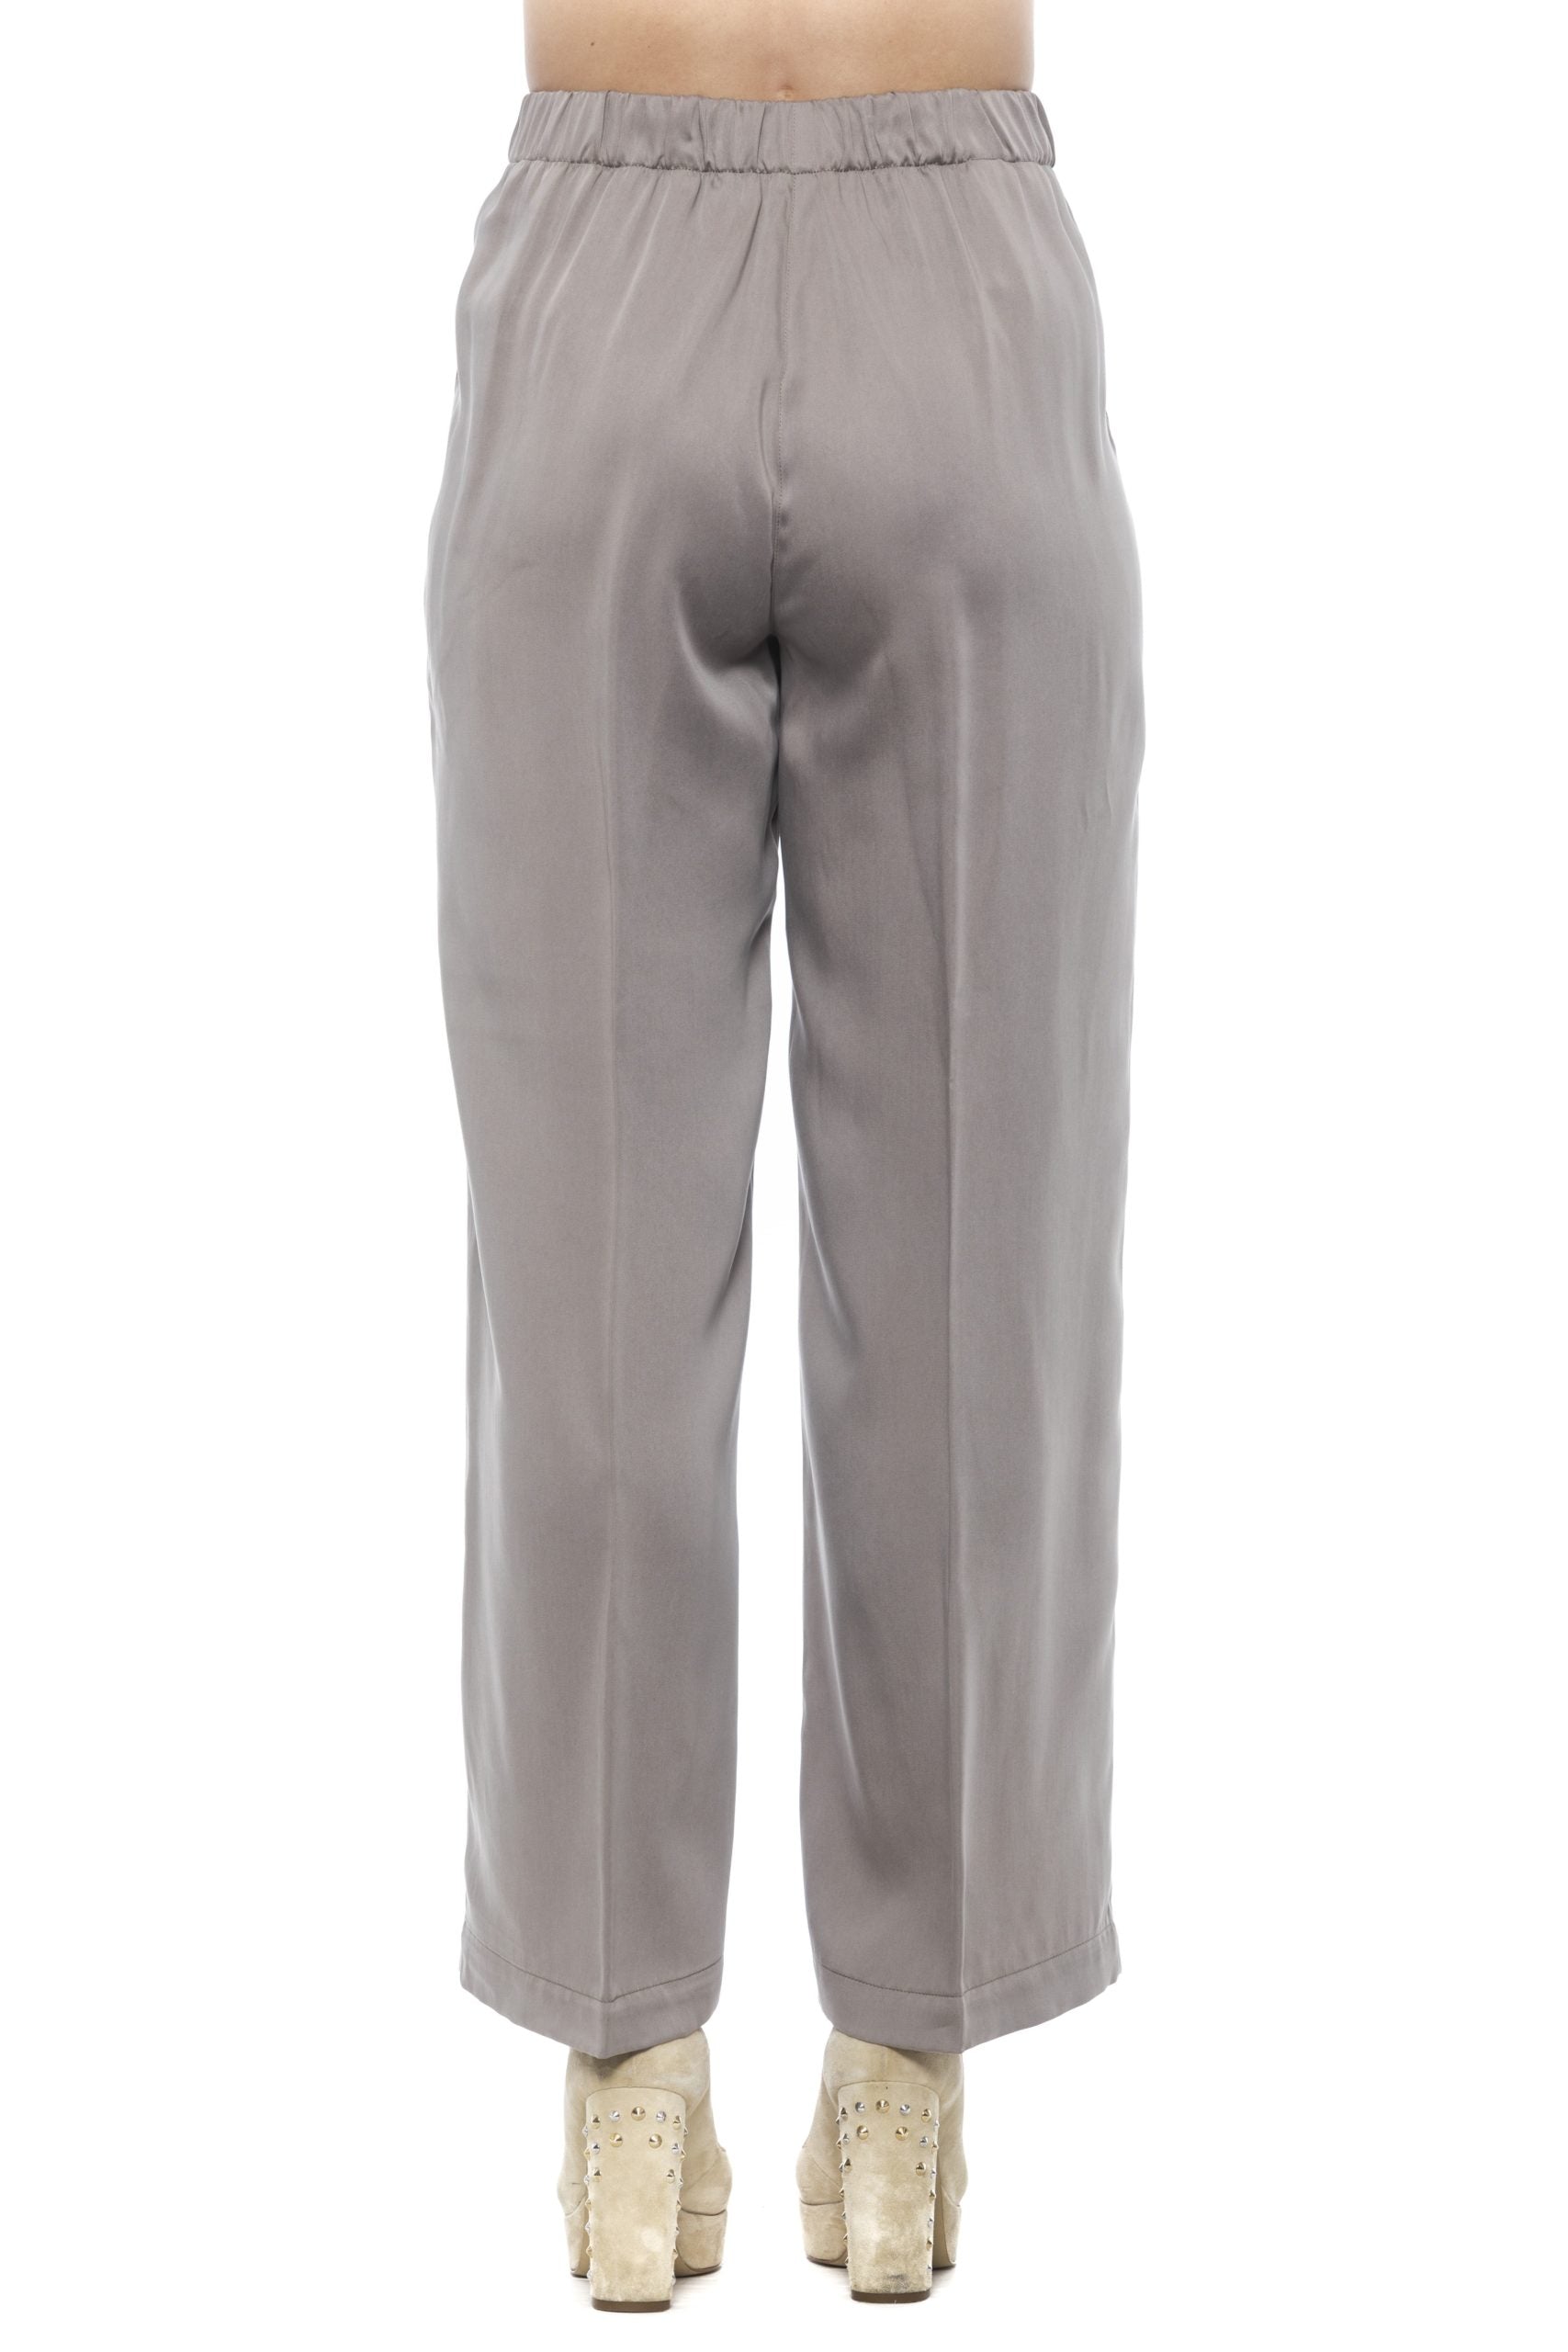 PESERICO High Waist Wide Fit Grey Pant